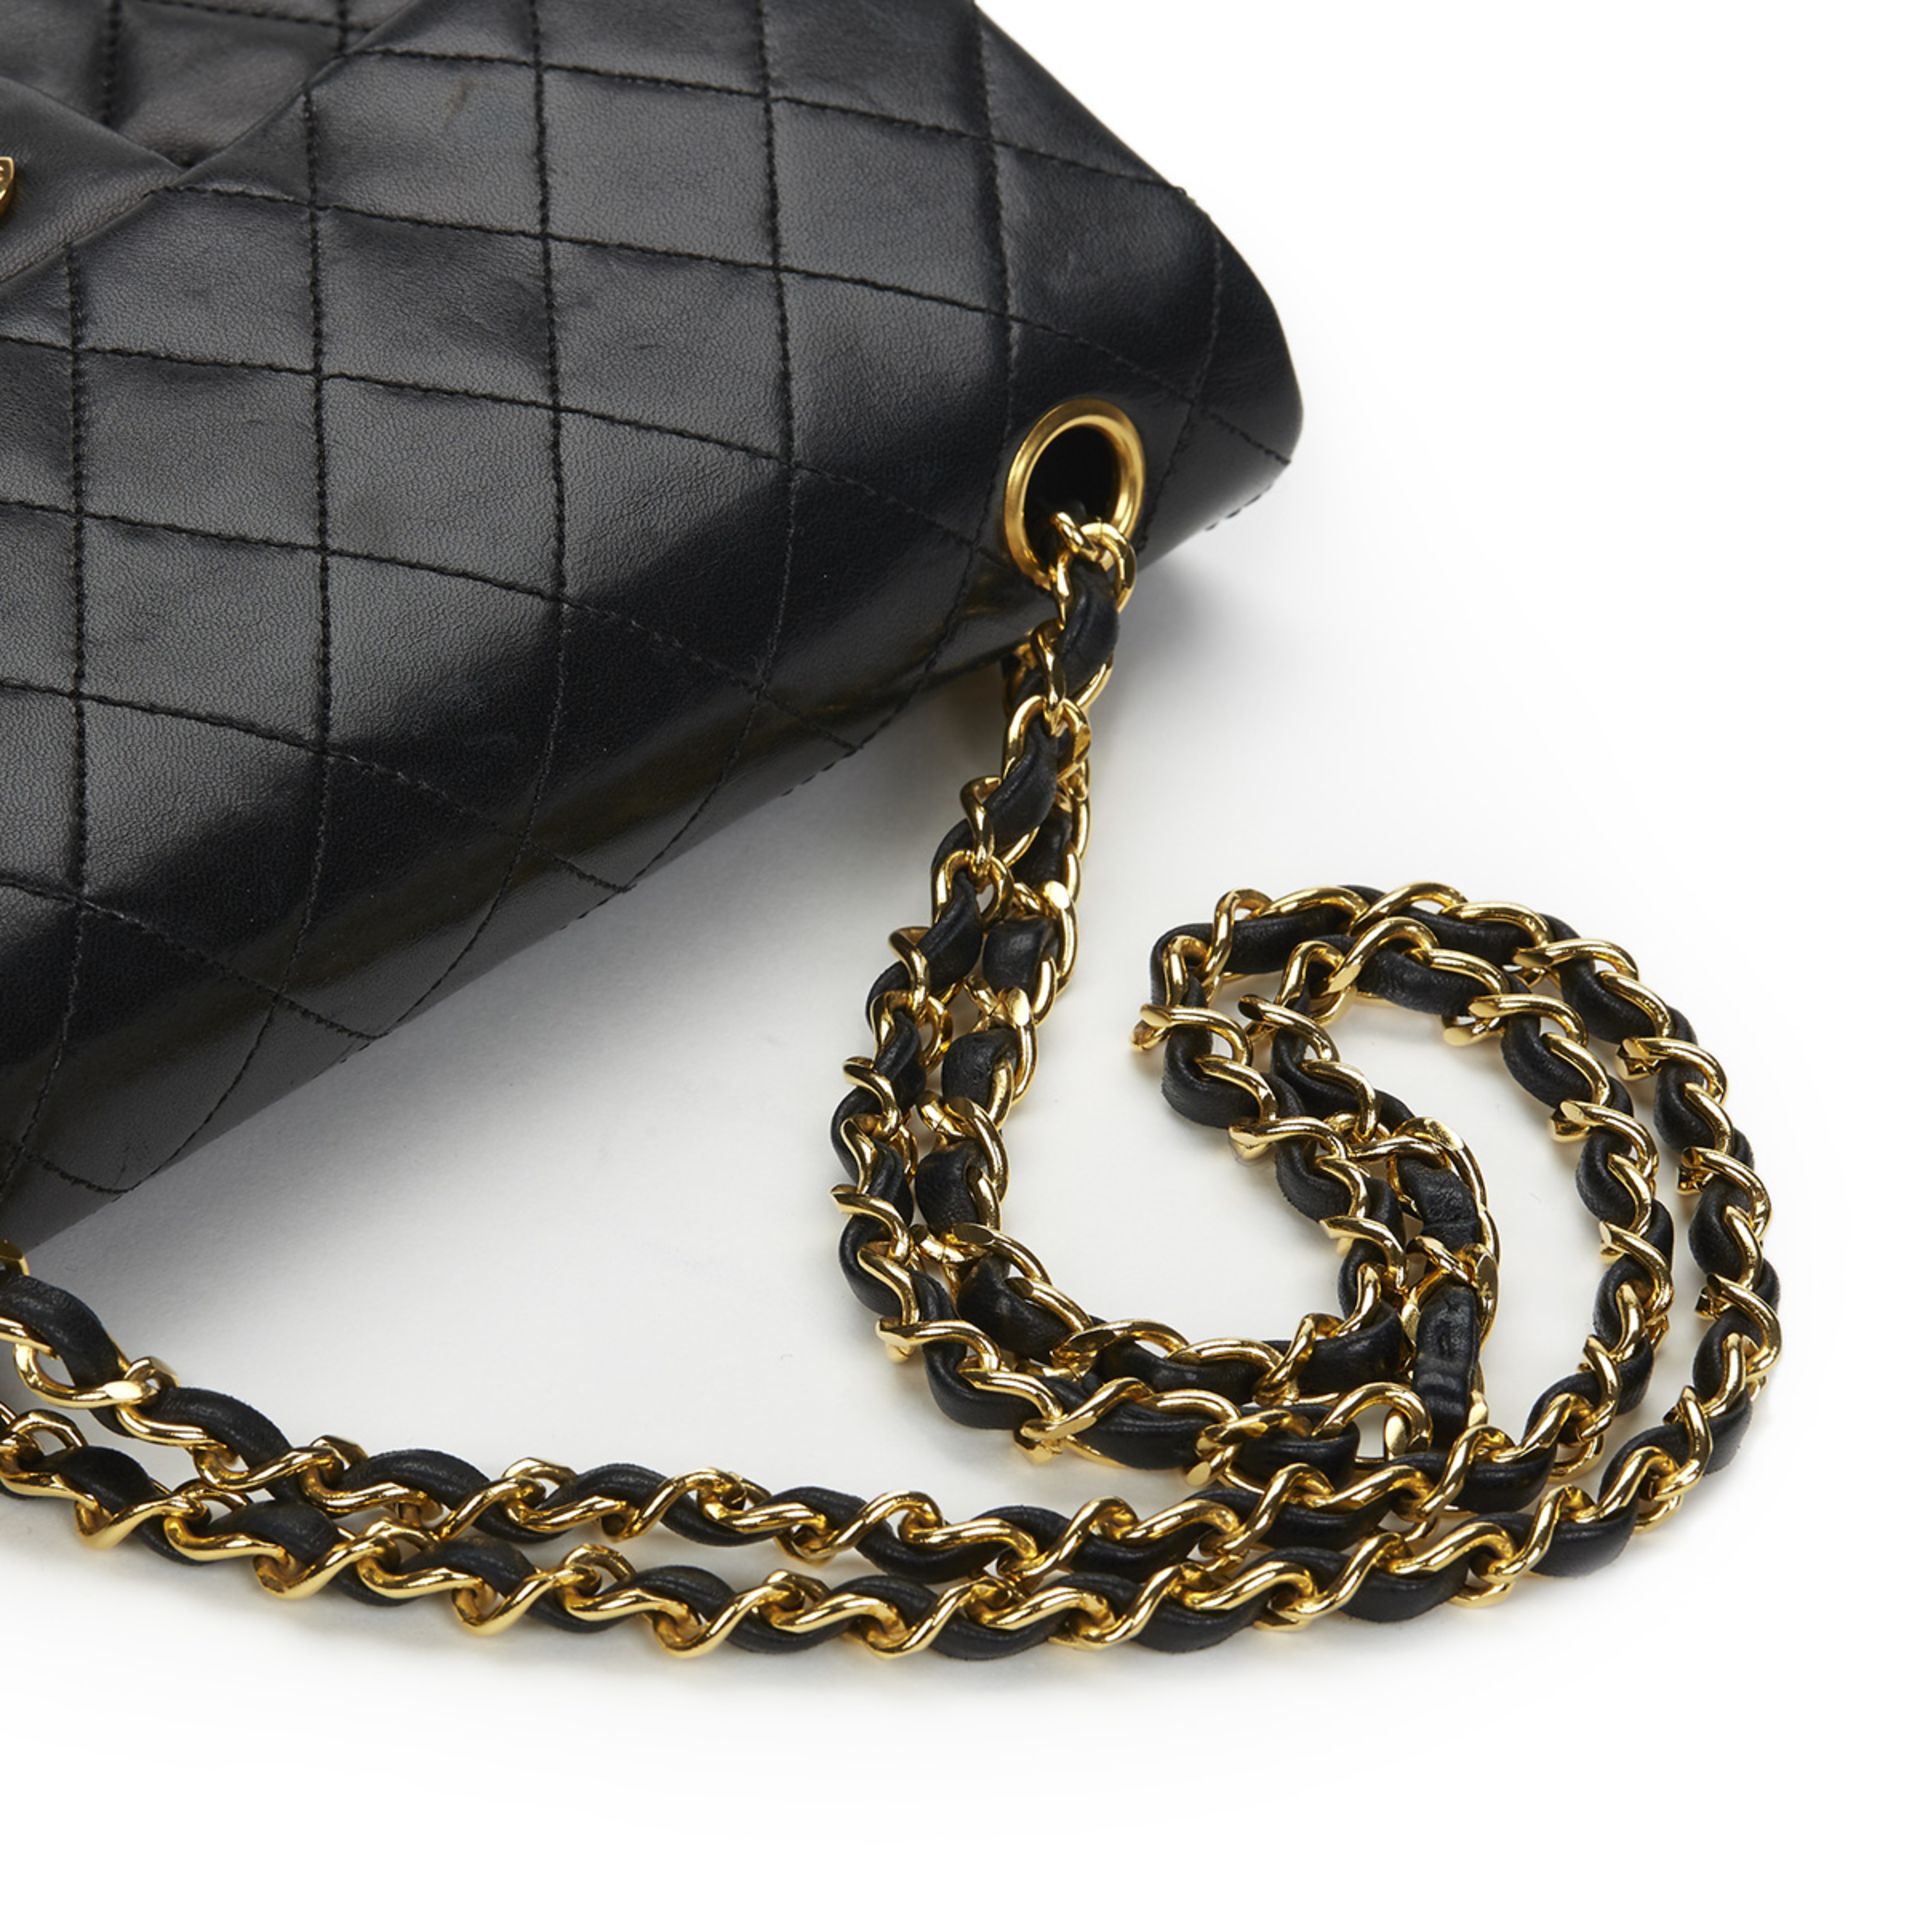 Black Quilted Lambskin Vintage Small Classic Double Flap Bag - Image 10 of 11